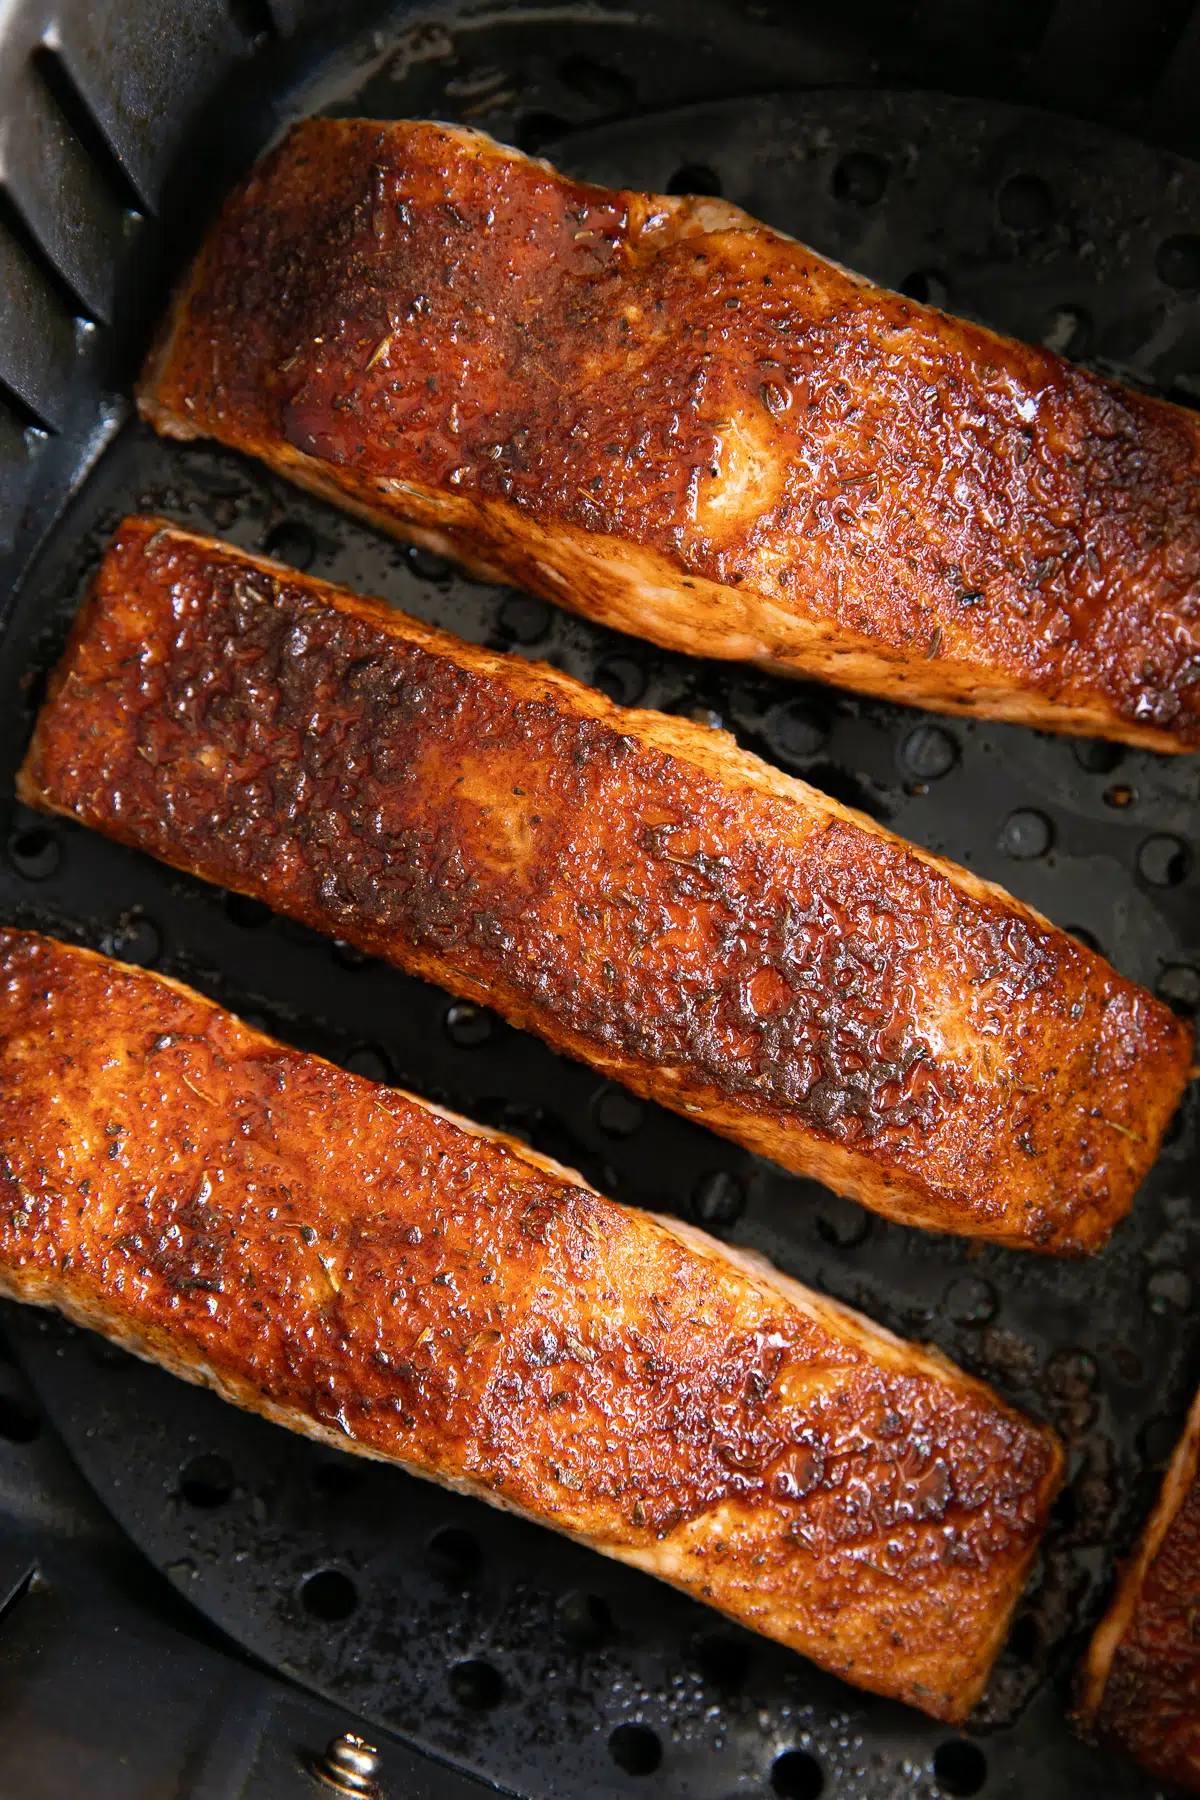 Three cooked salmon fillets in an air fryer basket after cooking.